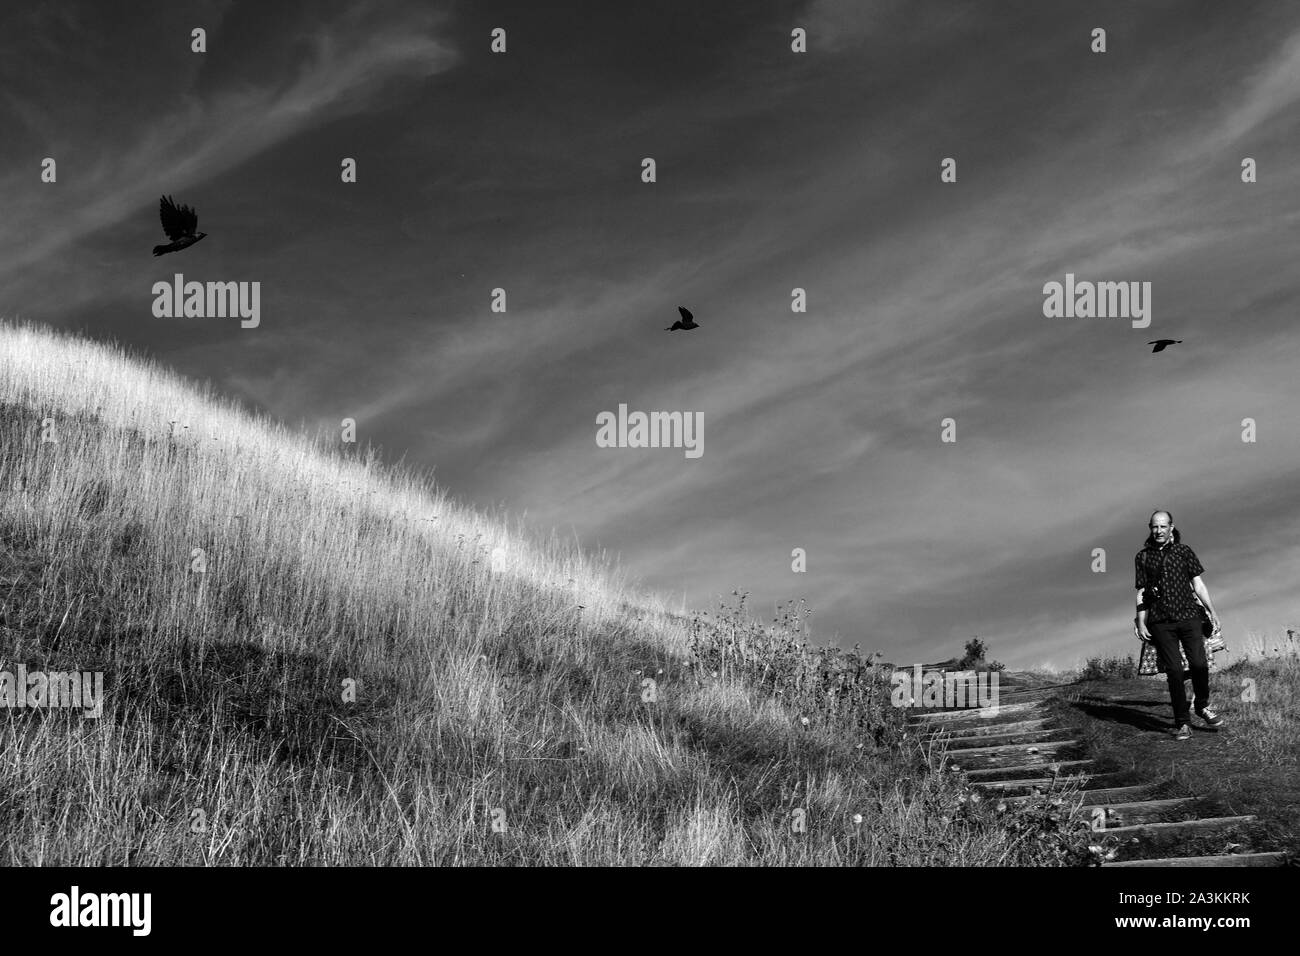 A man walking descending a hill by Glastonbury Tor. Stock Photo